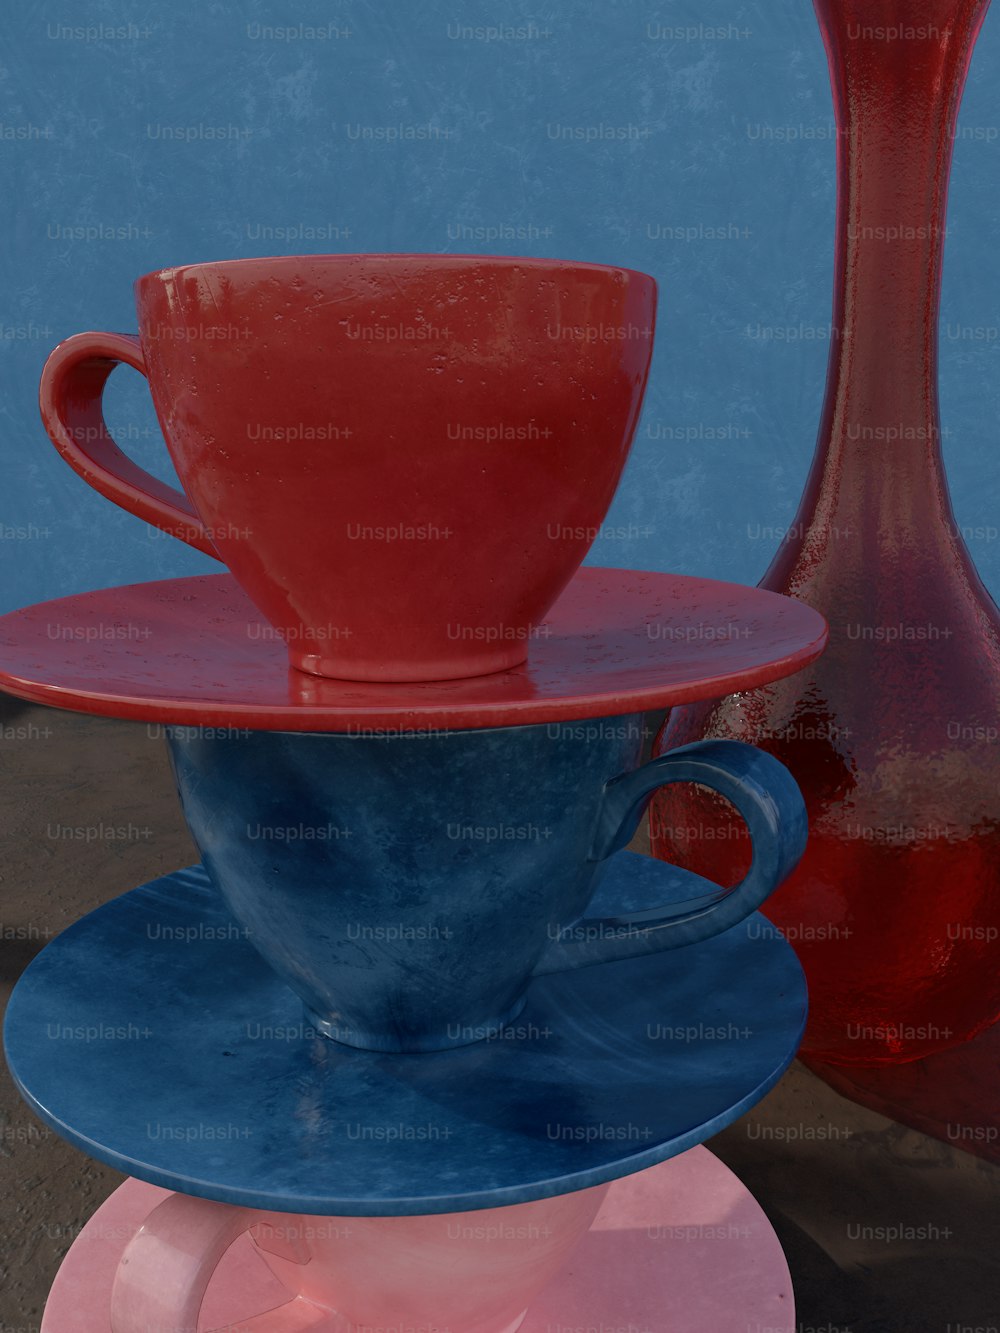 three different colored cups and saucers on a table